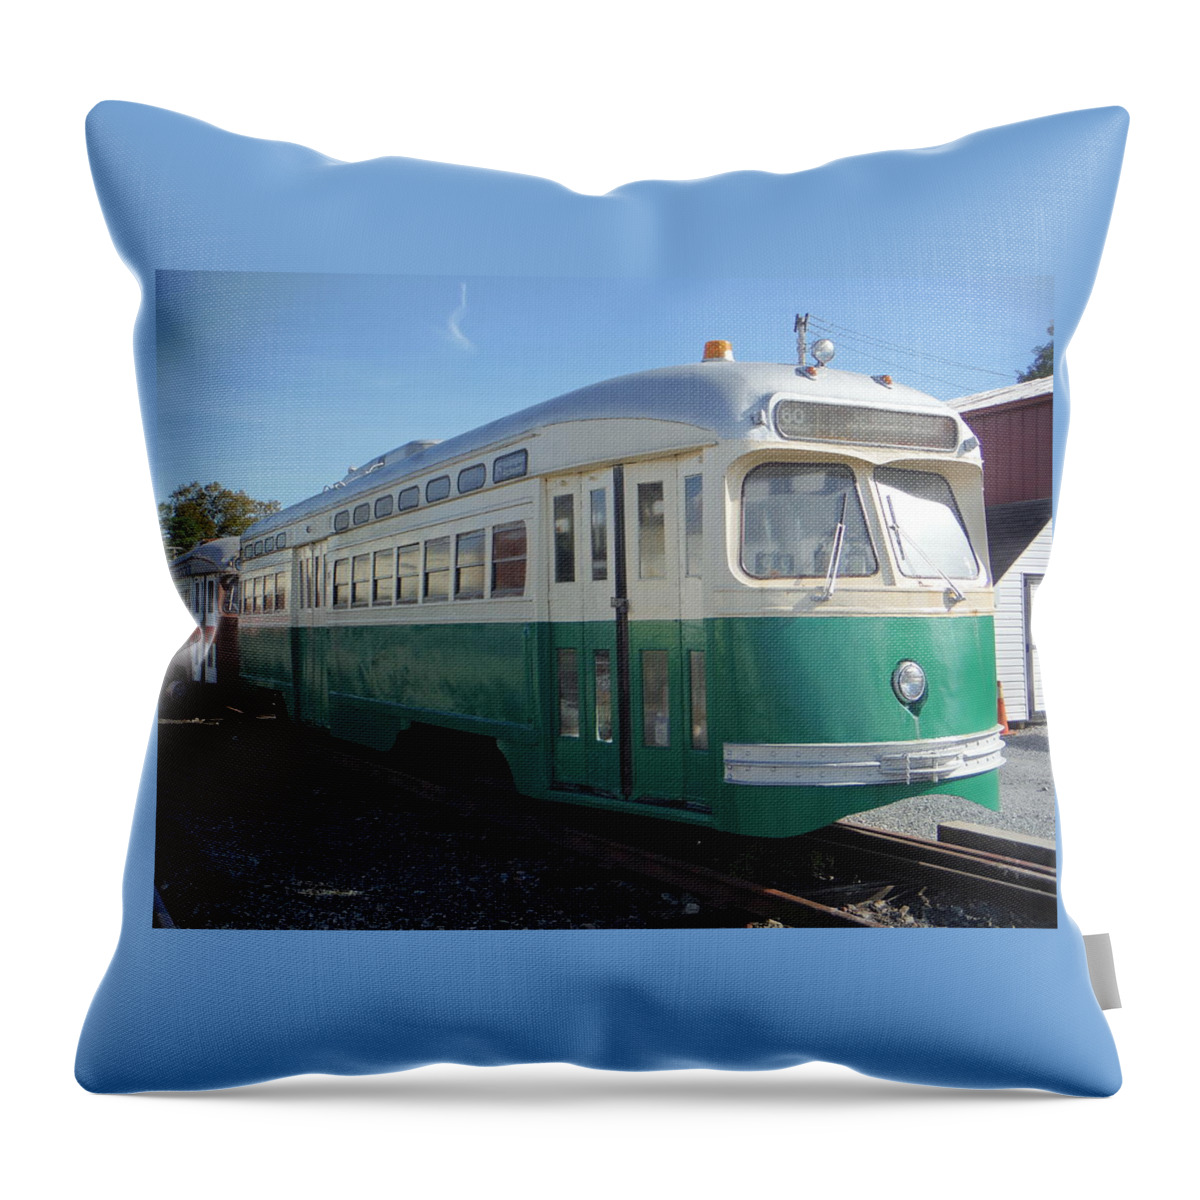 Trolley Throw Pillow featuring the photograph Vintage Street Trolley by Jacqueline Whitcomb